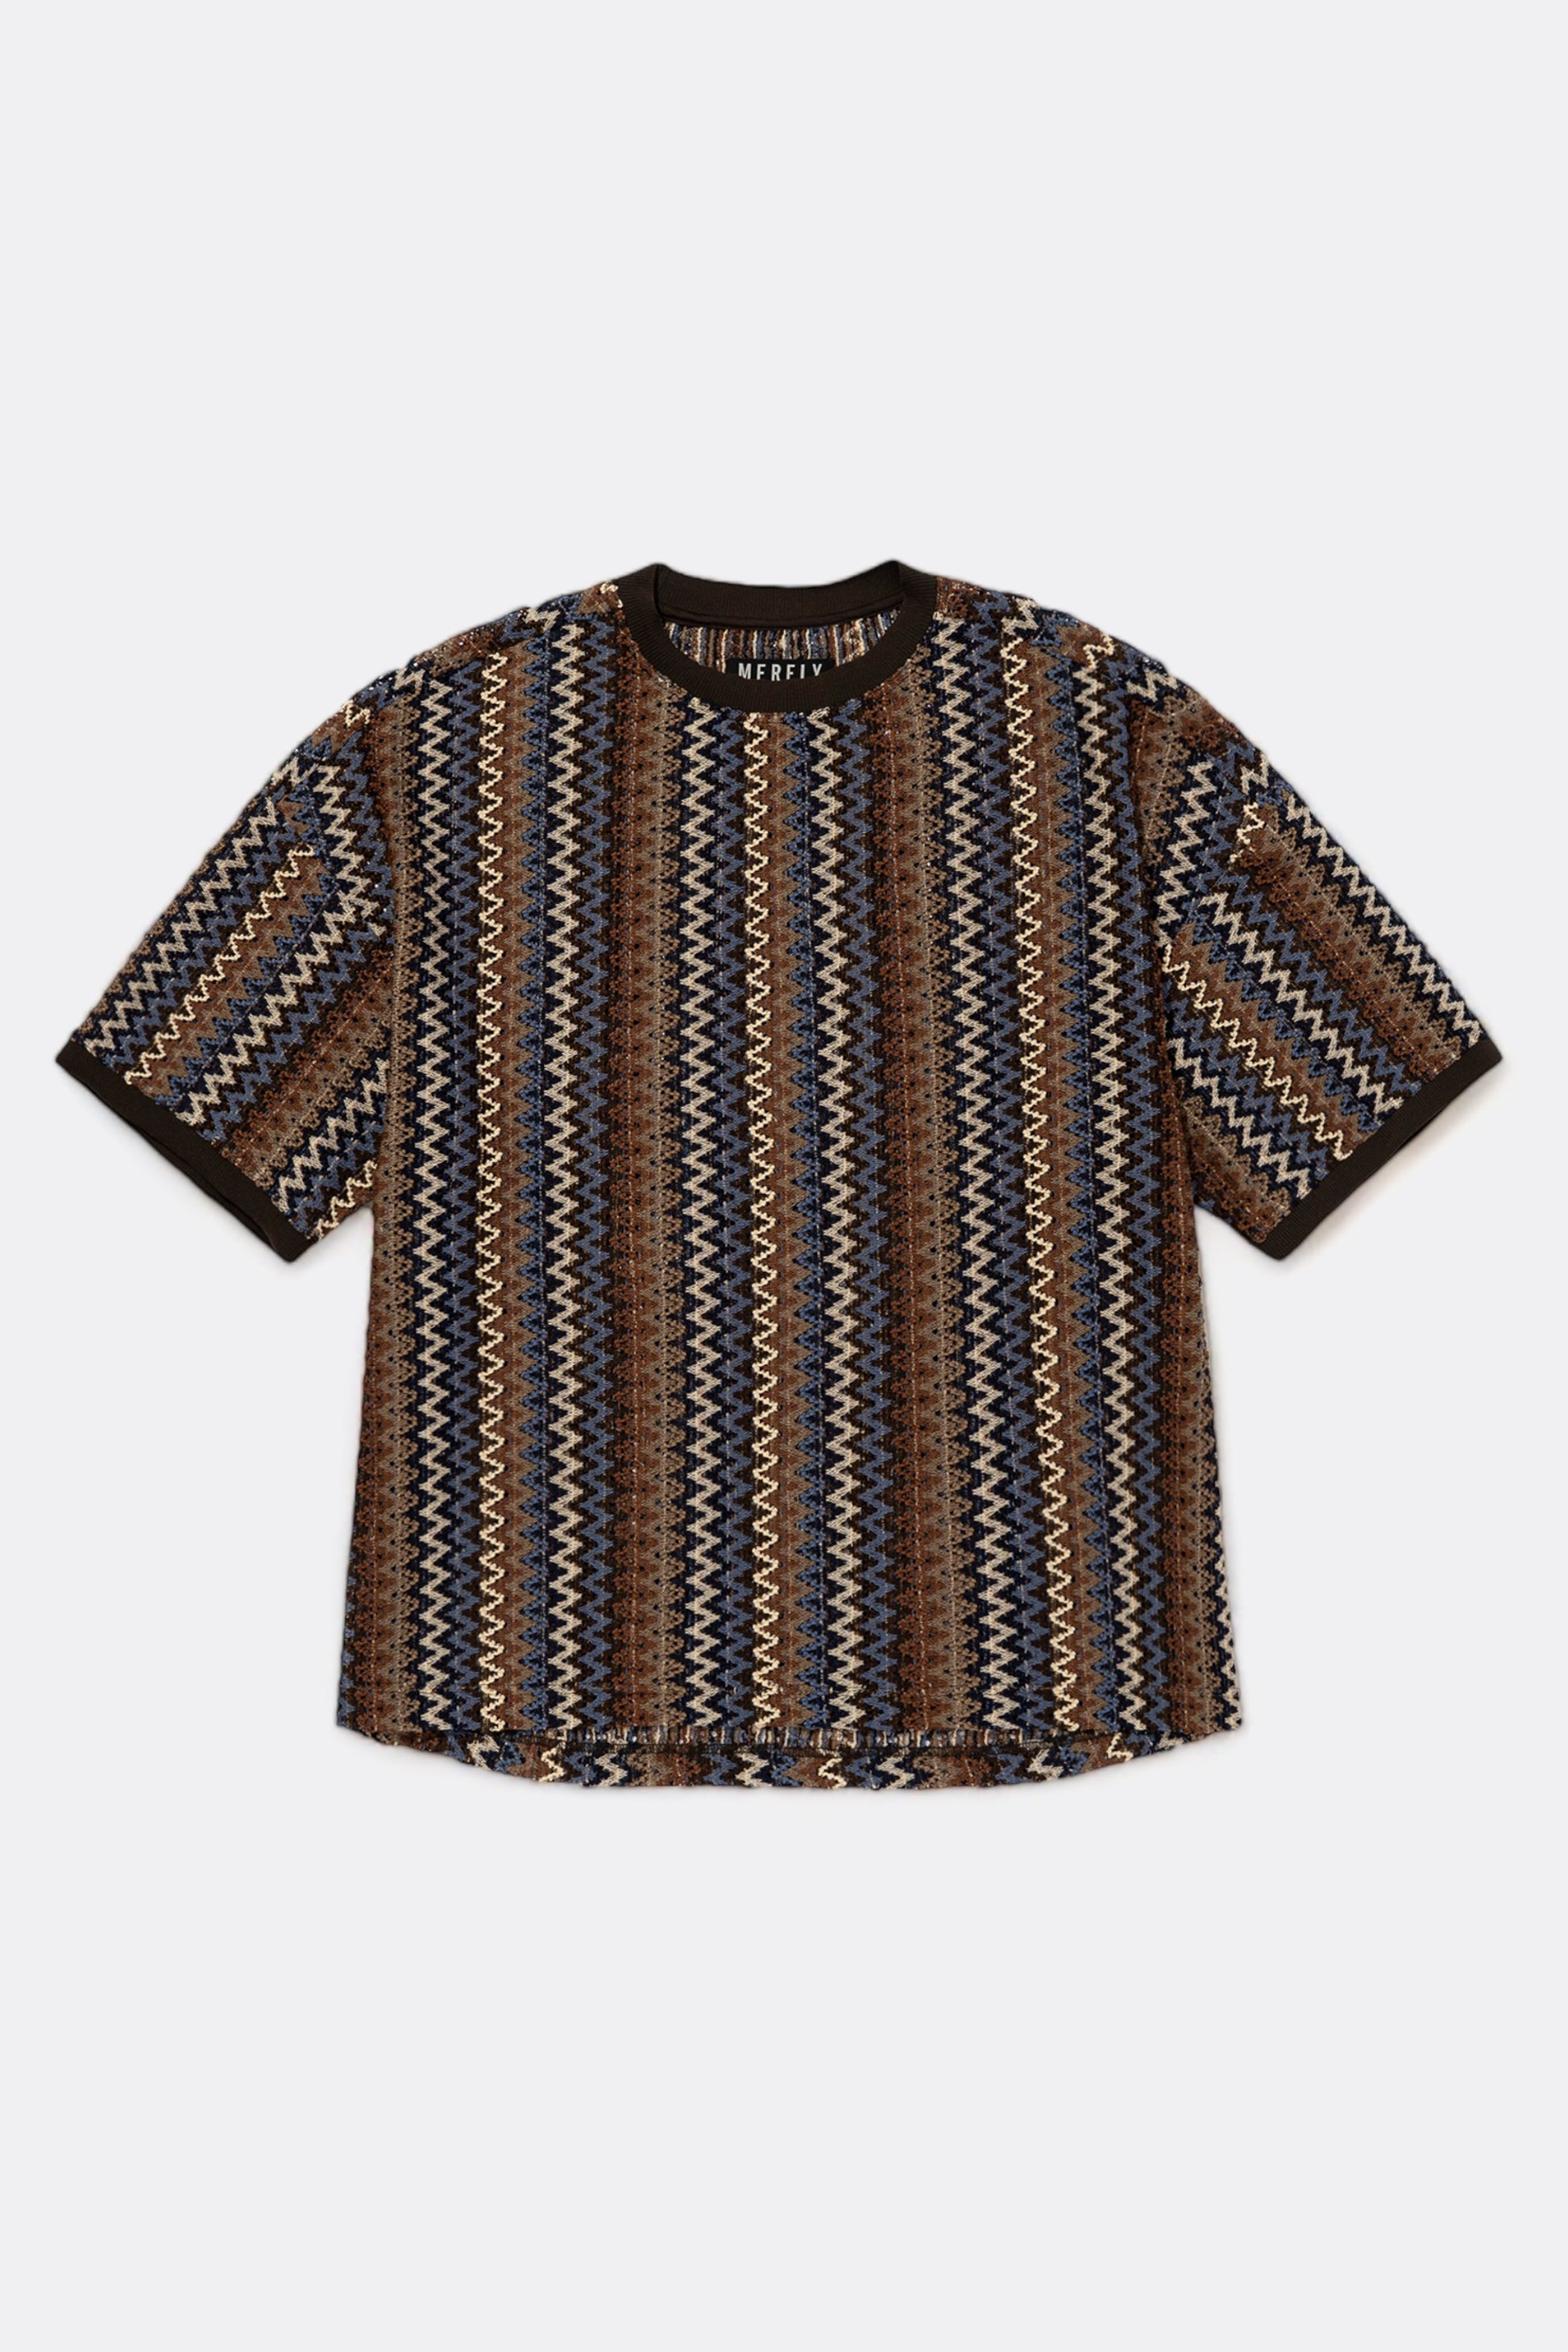 Merely Made - Merely Hmong Hoa Knit T-Shirt (Brown)